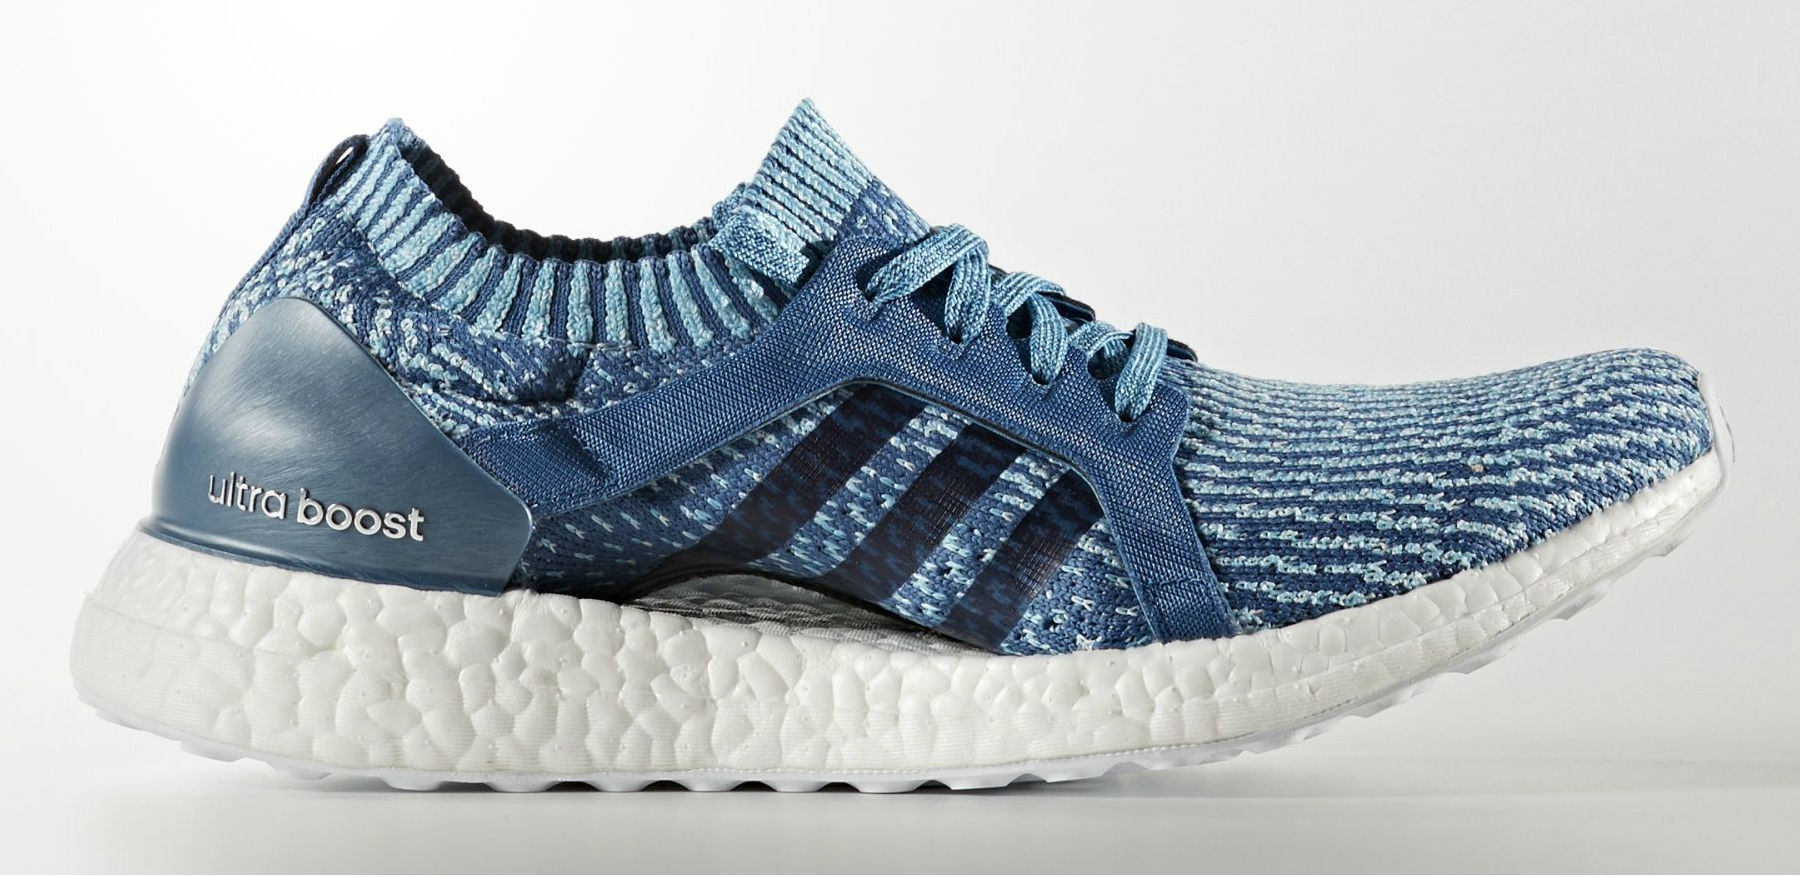 parley-adidas-ultra-boost-8 - WearTesters